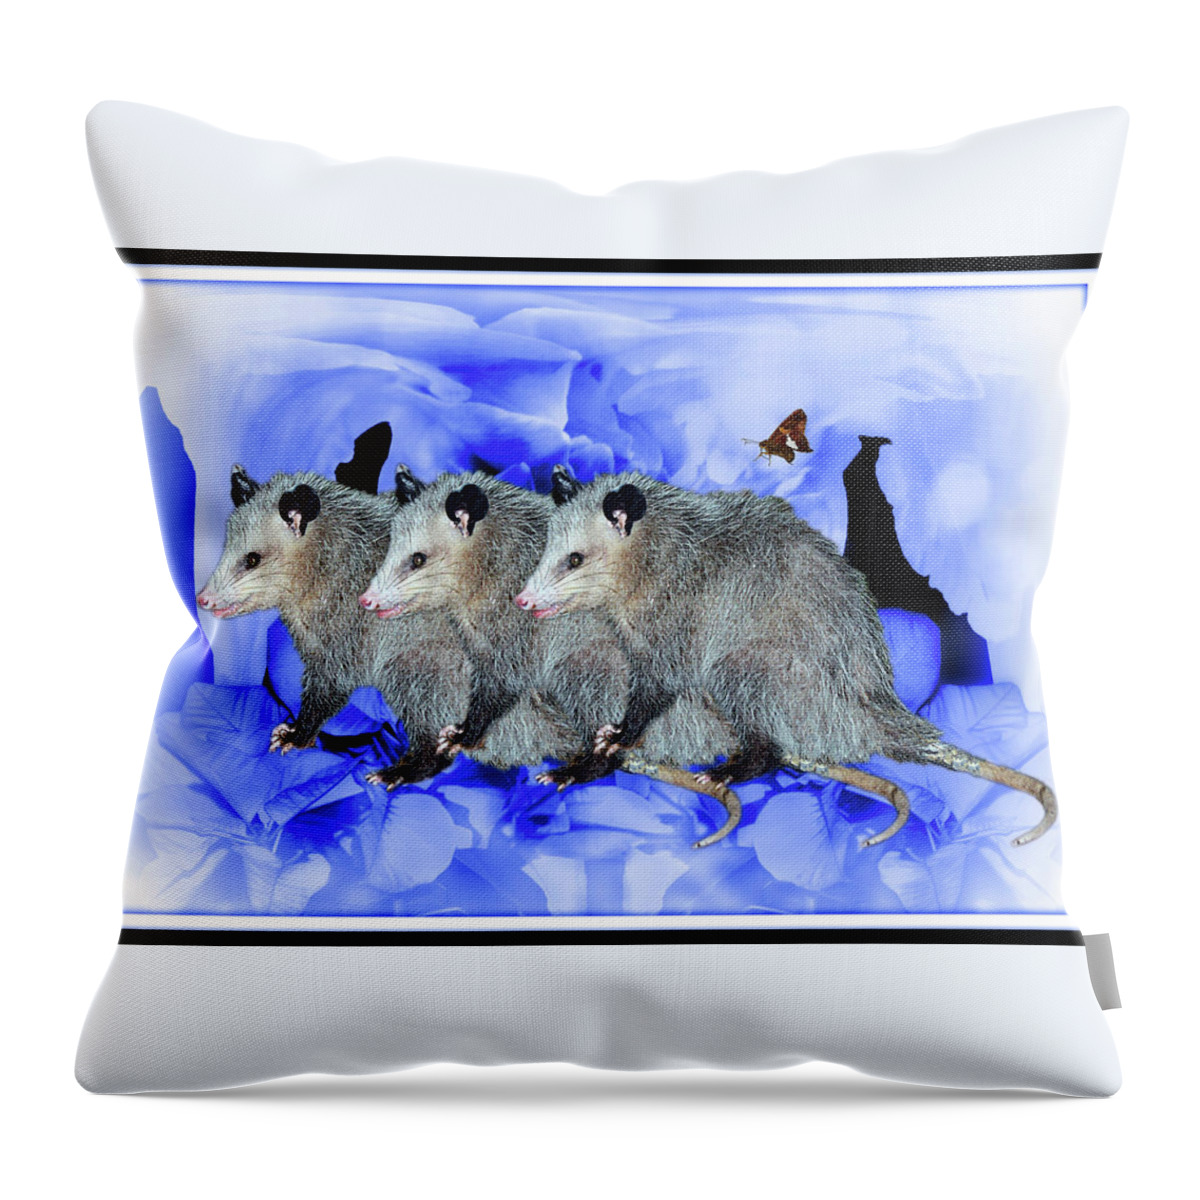 Possums Throw Pillow featuring the digital art Party Of Possums by Constance Lowery